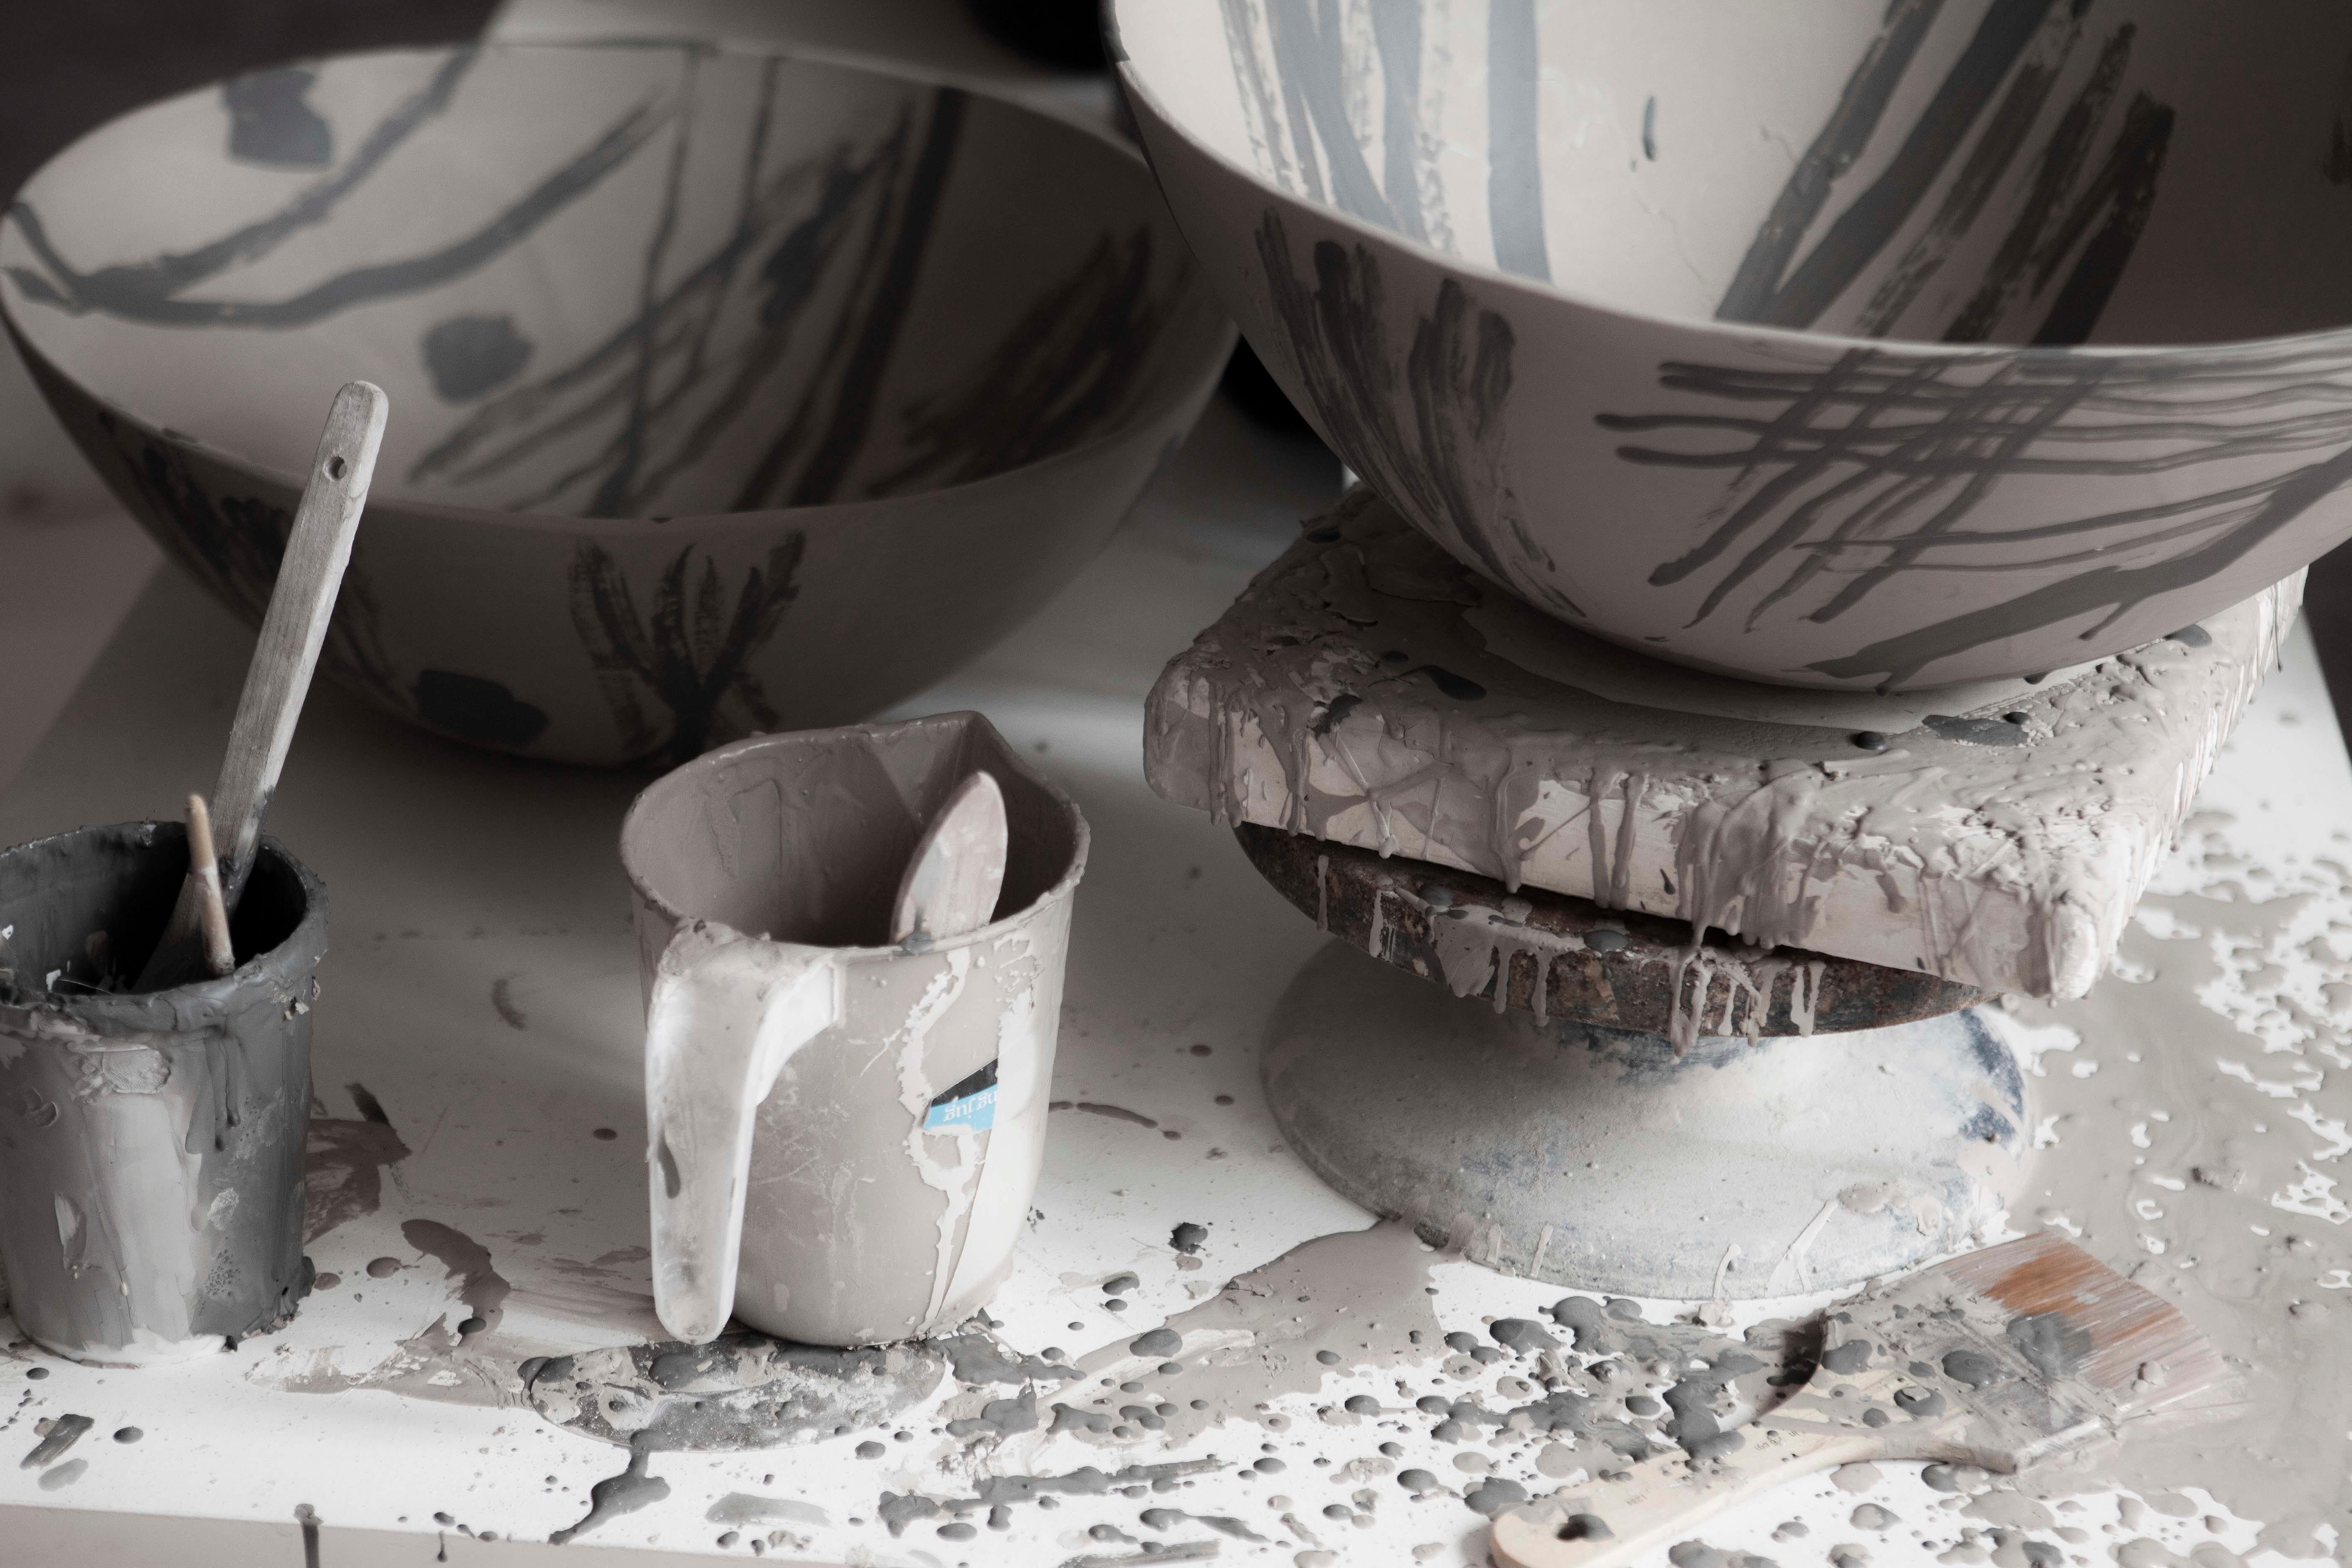 Acclaimed conceptual artist Bruce McLean debuts a vast new body of work titled Garden Ware that was exhibited at the Victoria and Albert Museum in London. The collection includes one-off earthenware creations by McLean, including vases, bowls,